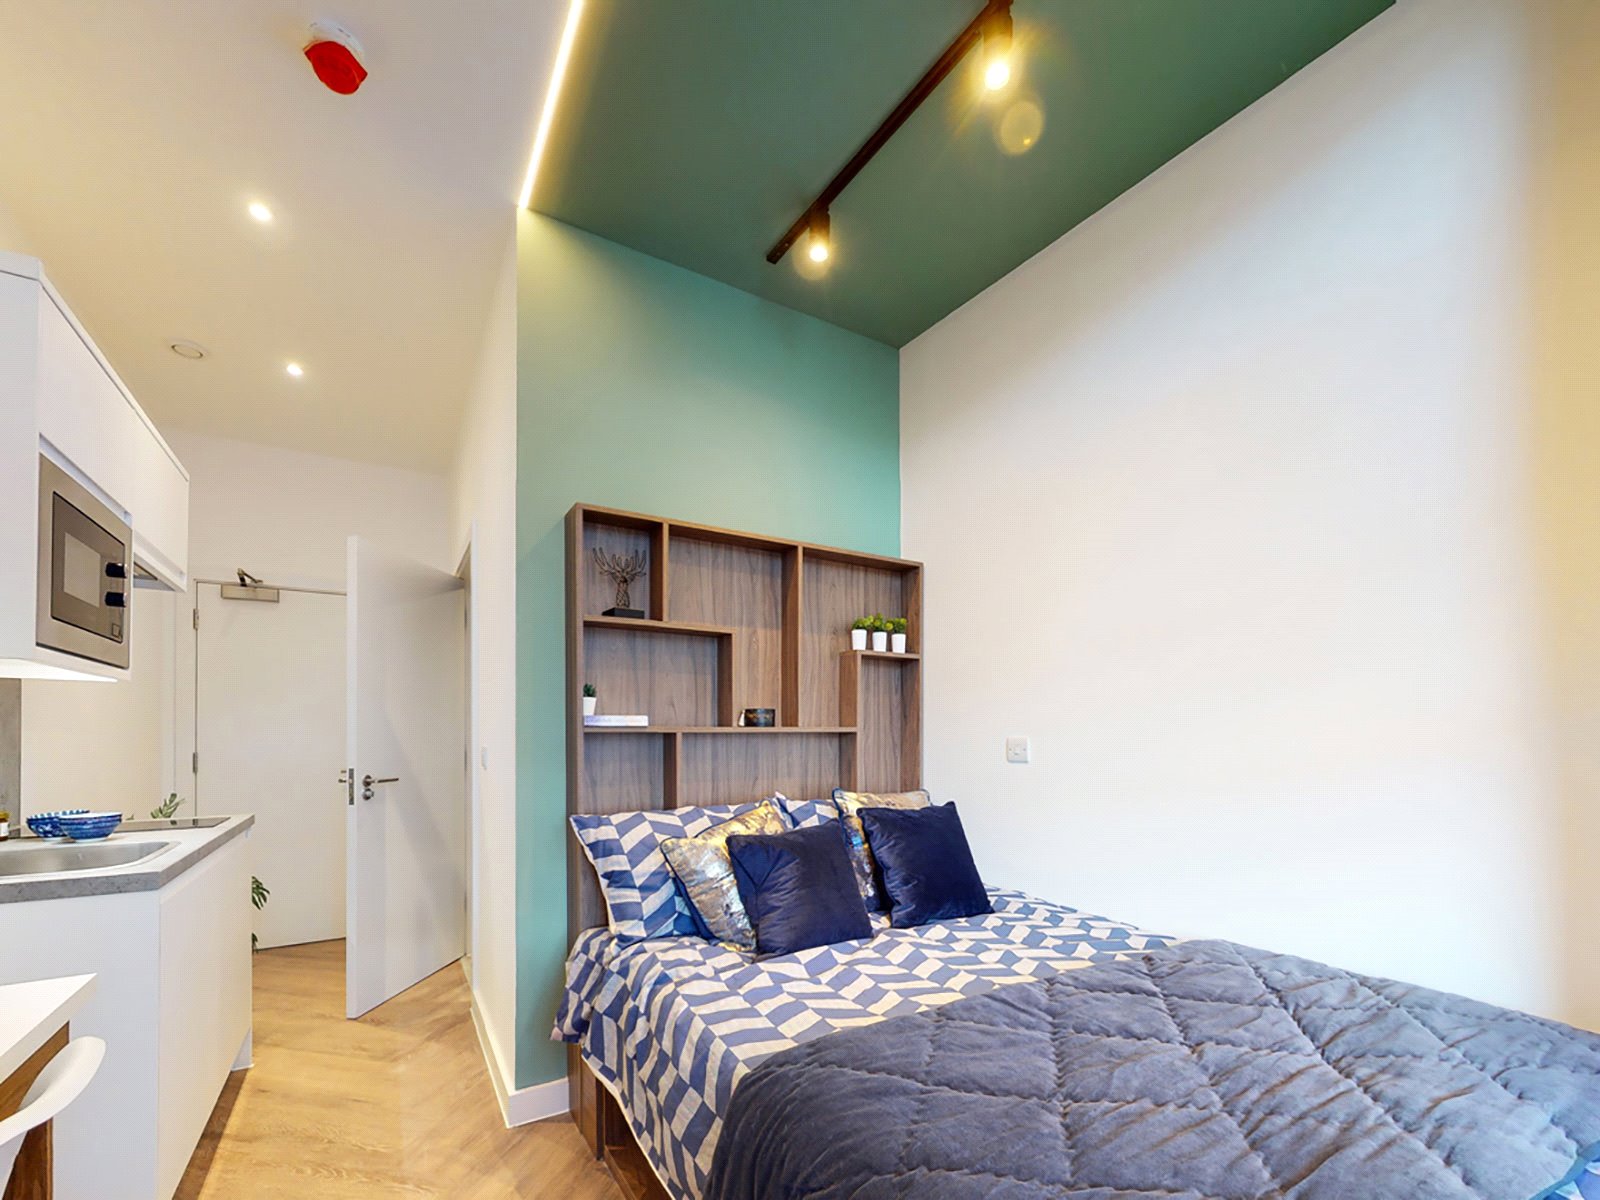 0 bed apartment for rent in London. From YPP - Sheffield